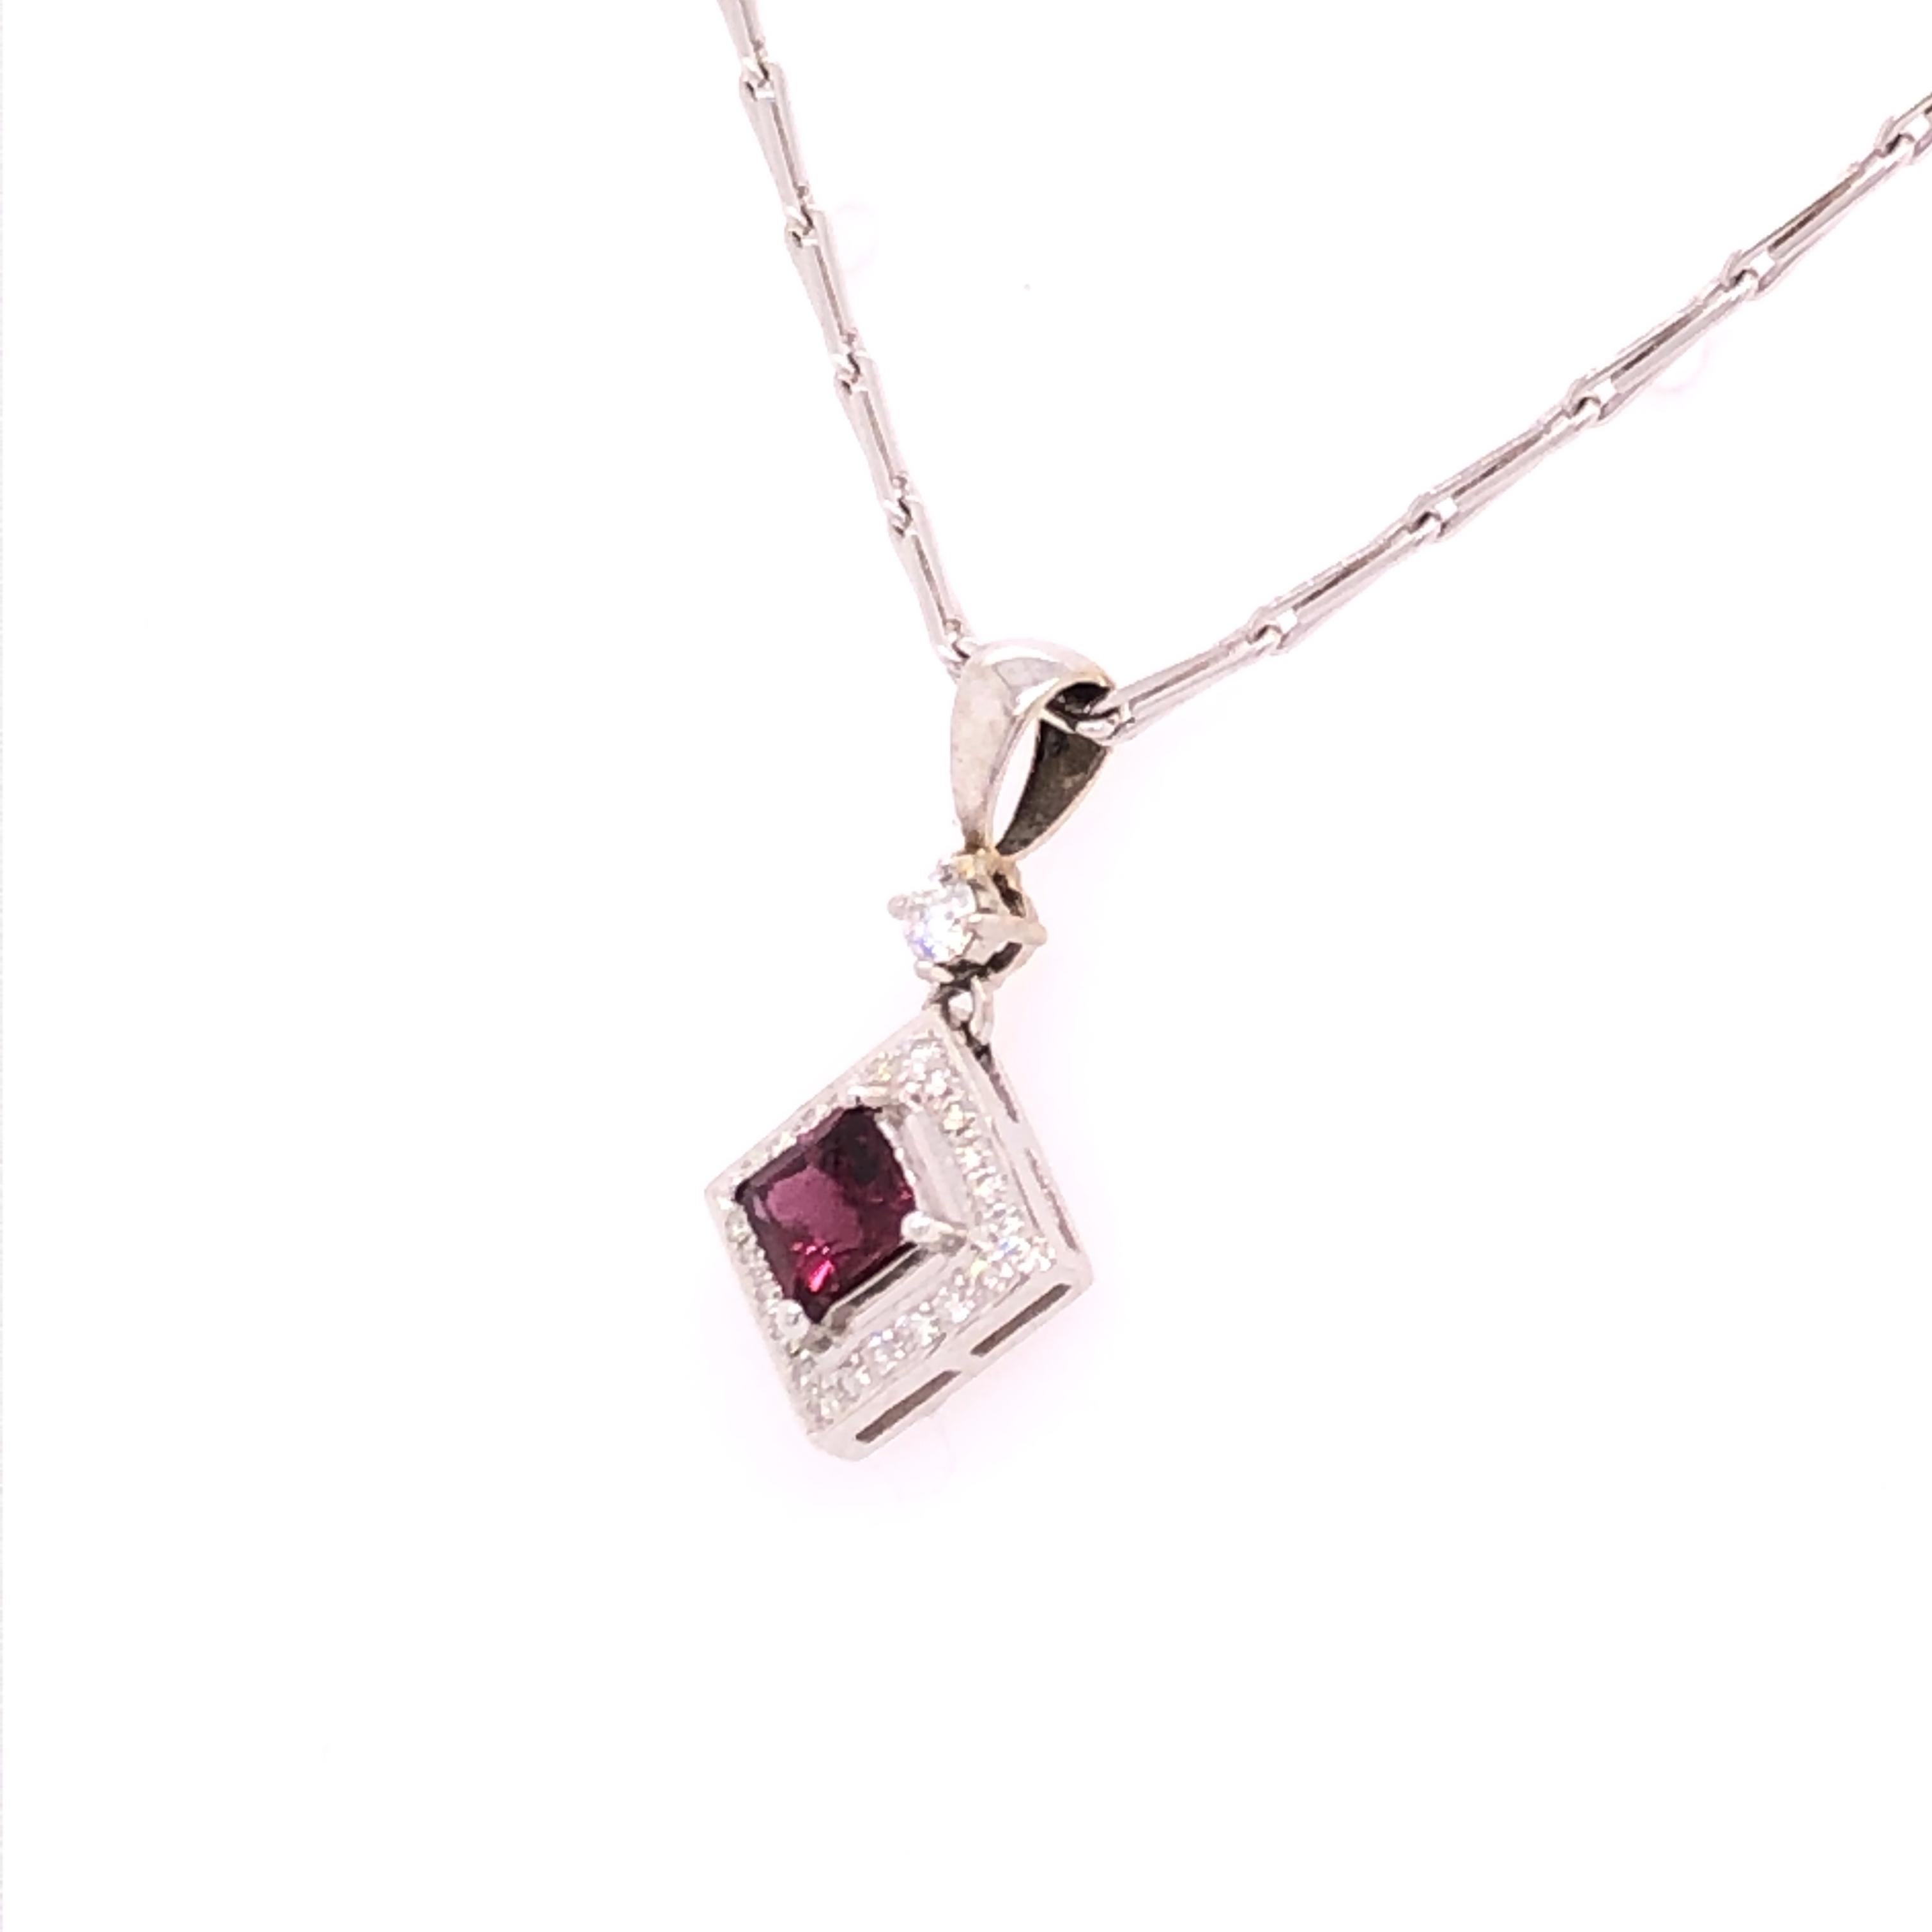 Contemporary Princess Cut Pink Sapphire, Diamond, and White Gold Necklace